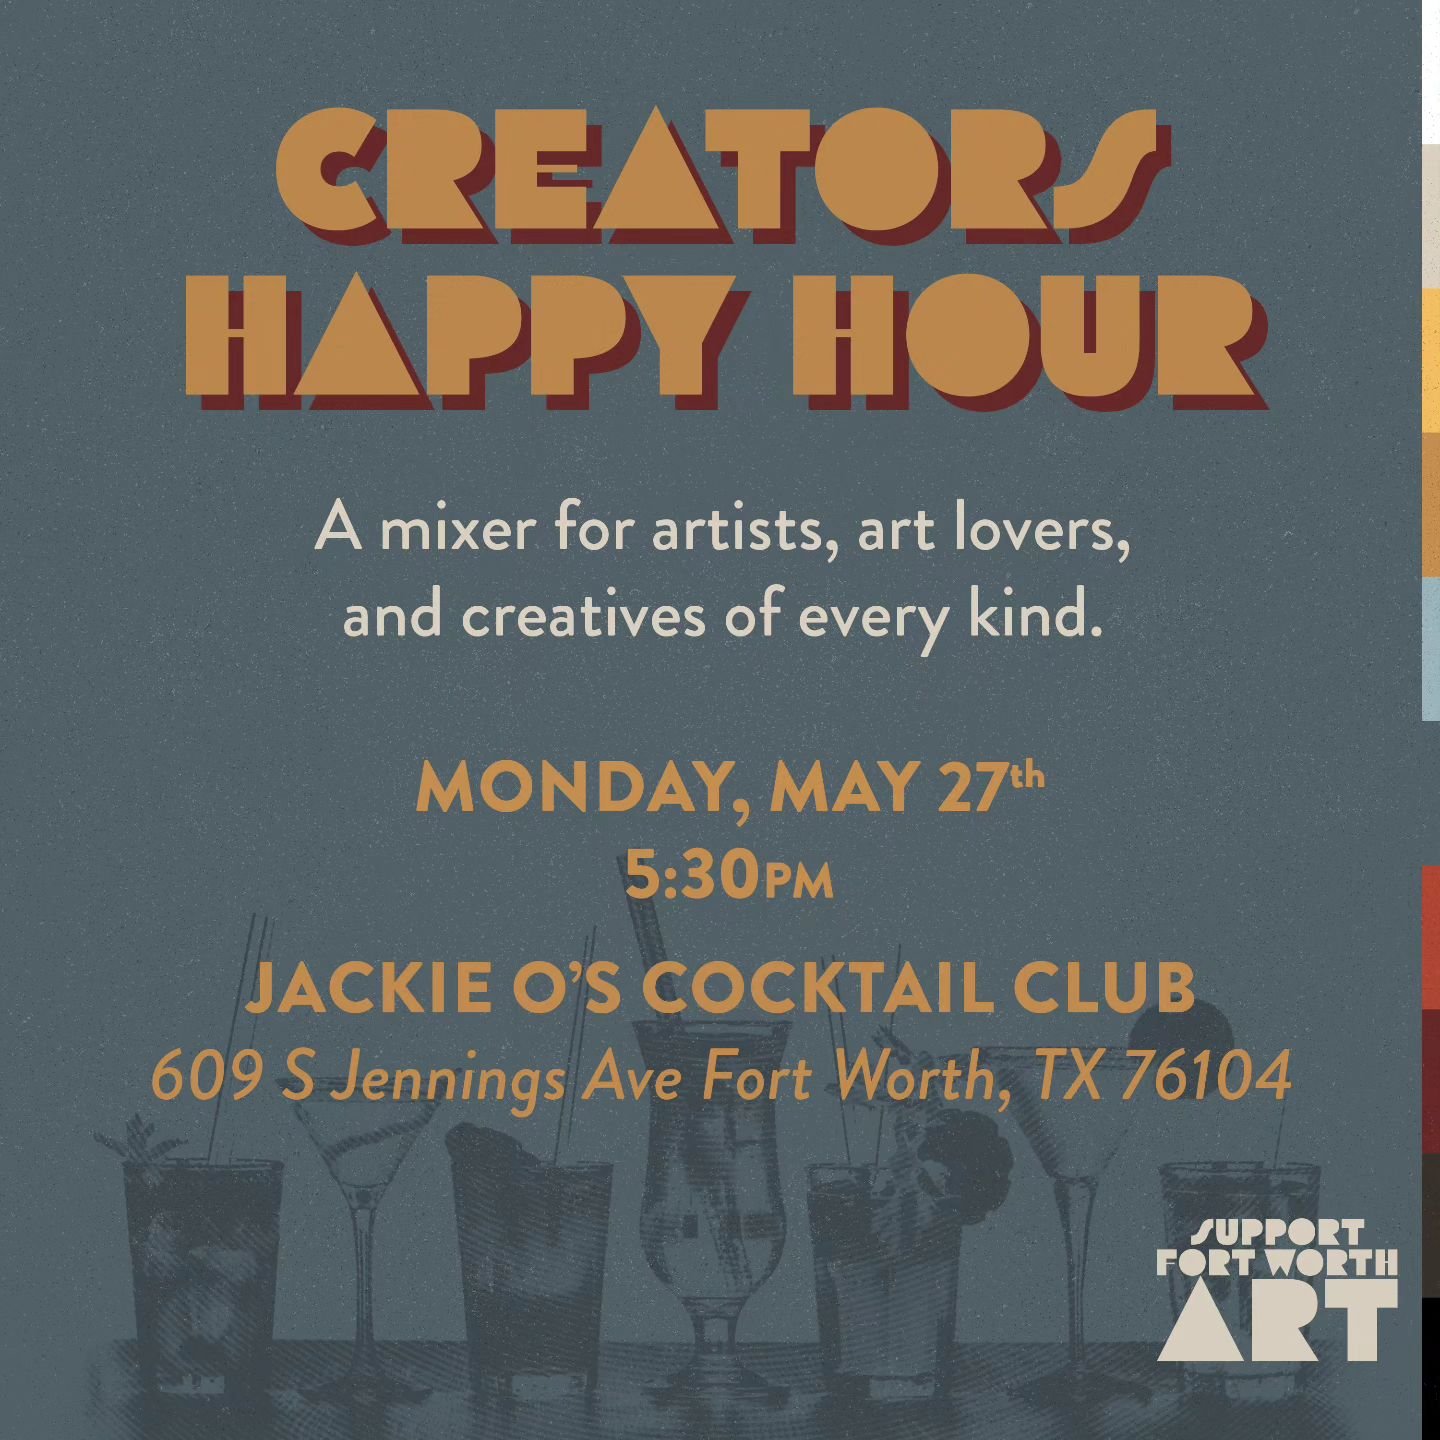 Curious to meet artist art lovers, and creative thinkers? Wondering what cool stuff is going on in the Fort Worth arts scene? Come to our monthly Creators Happy Hour, last Monday of the month at 5:30pm in Jackie O's Cocktail Club. See y'all there!